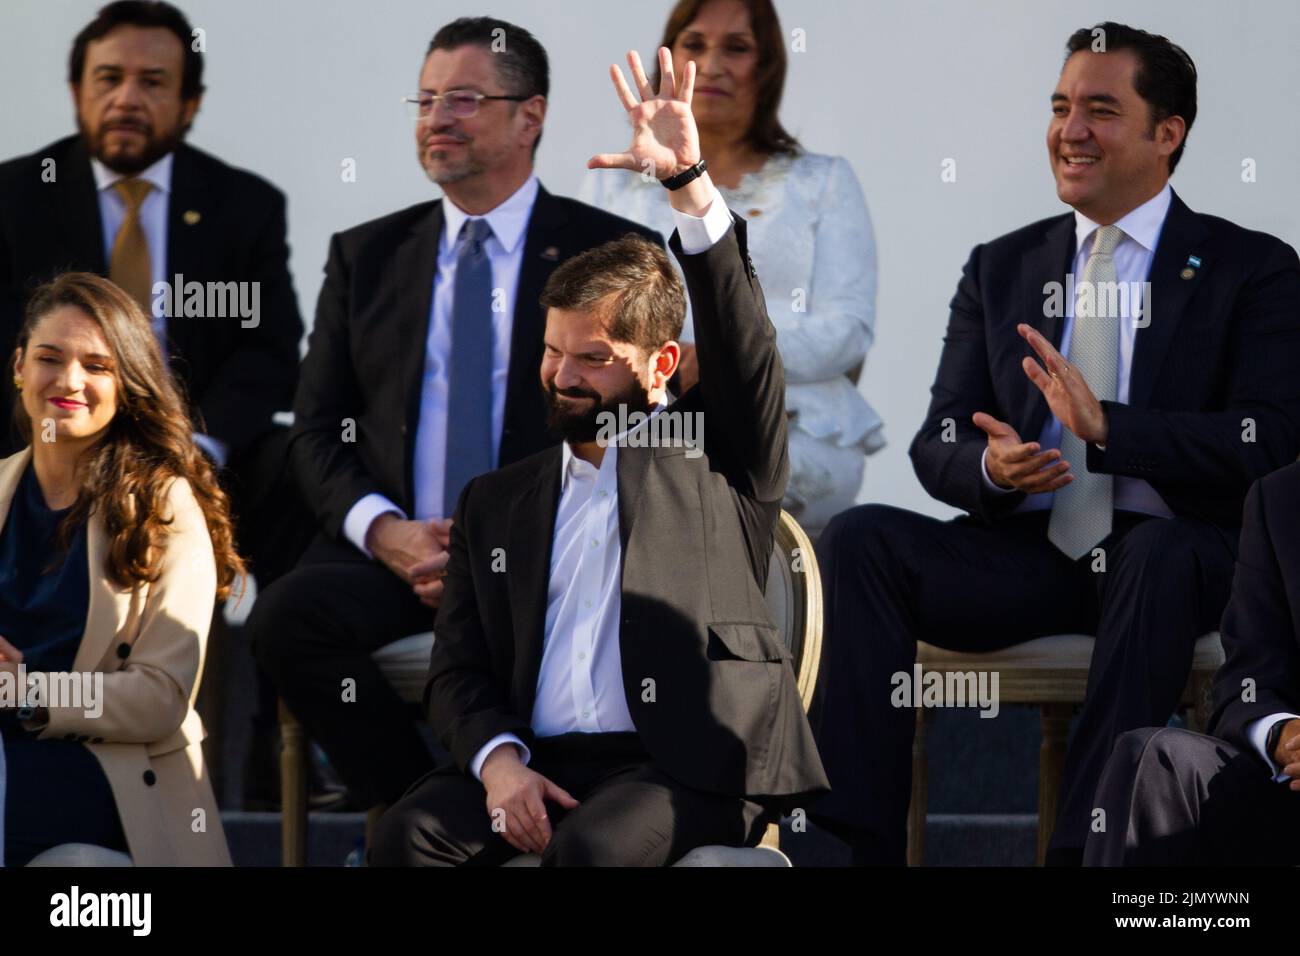 Chilean President Gabriel Boric gestures during the inauguration event of Colombia's first left-wing president Gustavo Petro inauguration event, in Bo Stock Photo